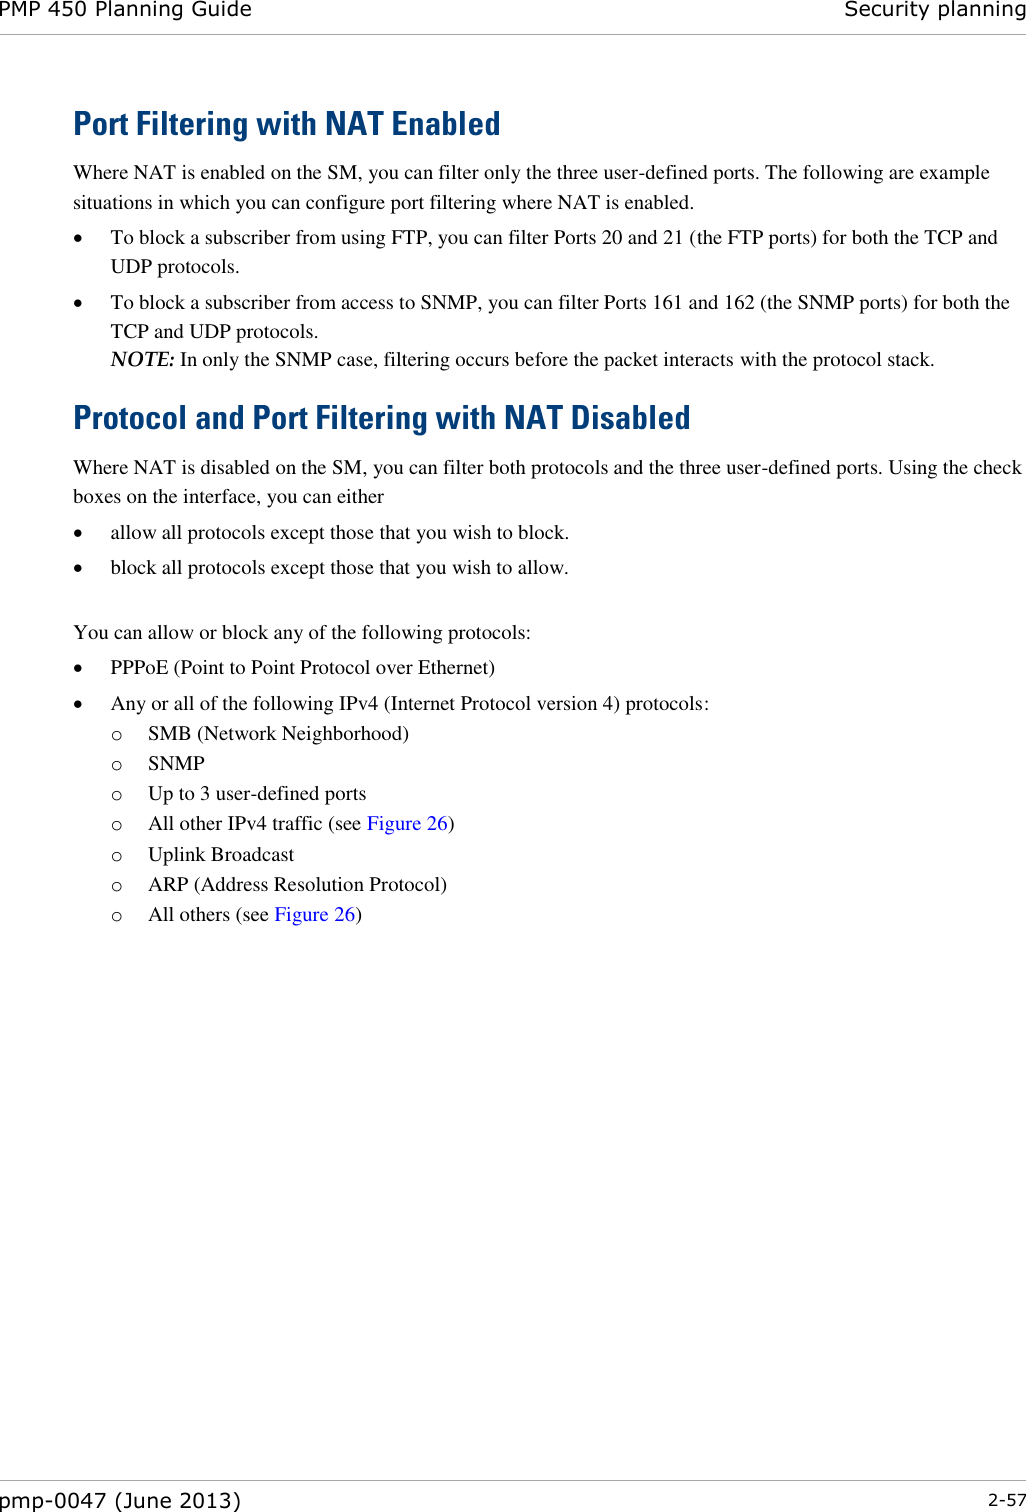 PMP 450 Planning Guide Security planning  pmp-0047 (June 2013)  2-57  Port Filtering with NAT Enabled Where NAT is enabled on the SM, you can filter only the three user-defined ports. The following are example situations in which you can configure port filtering where NAT is enabled.  To block a subscriber from using FTP, you can filter Ports 20 and 21 (the FTP ports) for both the TCP and UDP protocols.   To block a subscriber from access to SNMP, you can filter Ports 161 and 162 (the SNMP ports) for both the TCP and UDP protocols.  NOTE: In only the SNMP case, filtering occurs before the packet interacts with the protocol stack. Protocol and Port Filtering with NAT Disabled Where NAT is disabled on the SM, you can filter both protocols and the three user-defined ports. Using the check boxes on the interface, you can either   allow all protocols except those that you wish to block.  block all protocols except those that you wish to allow.  You can allow or block any of the following protocols:  PPPoE (Point to Point Protocol over Ethernet)  Any or all of the following IPv4 (Internet Protocol version 4) protocols: o SMB (Network Neighborhood) o SNMP o Up to 3 user-defined ports o All other IPv4 traffic (see Figure 26) o Uplink Broadcast o ARP (Address Resolution Protocol) o All others (see Figure 26)  